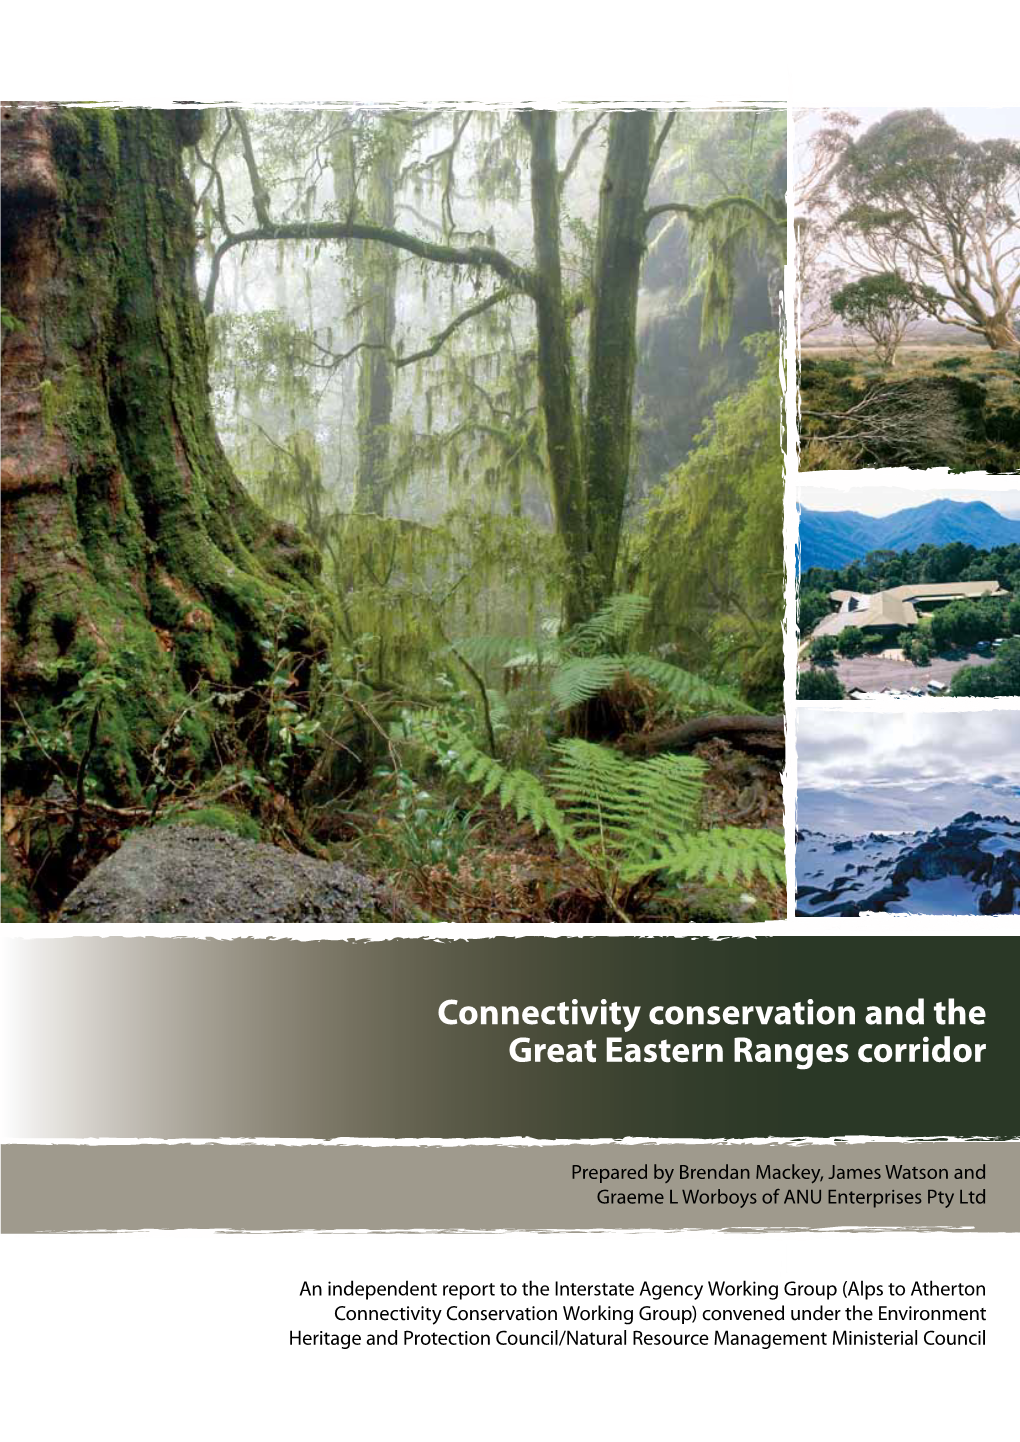 Connectivity Conservation and the Great Eastern Ranges Corridor